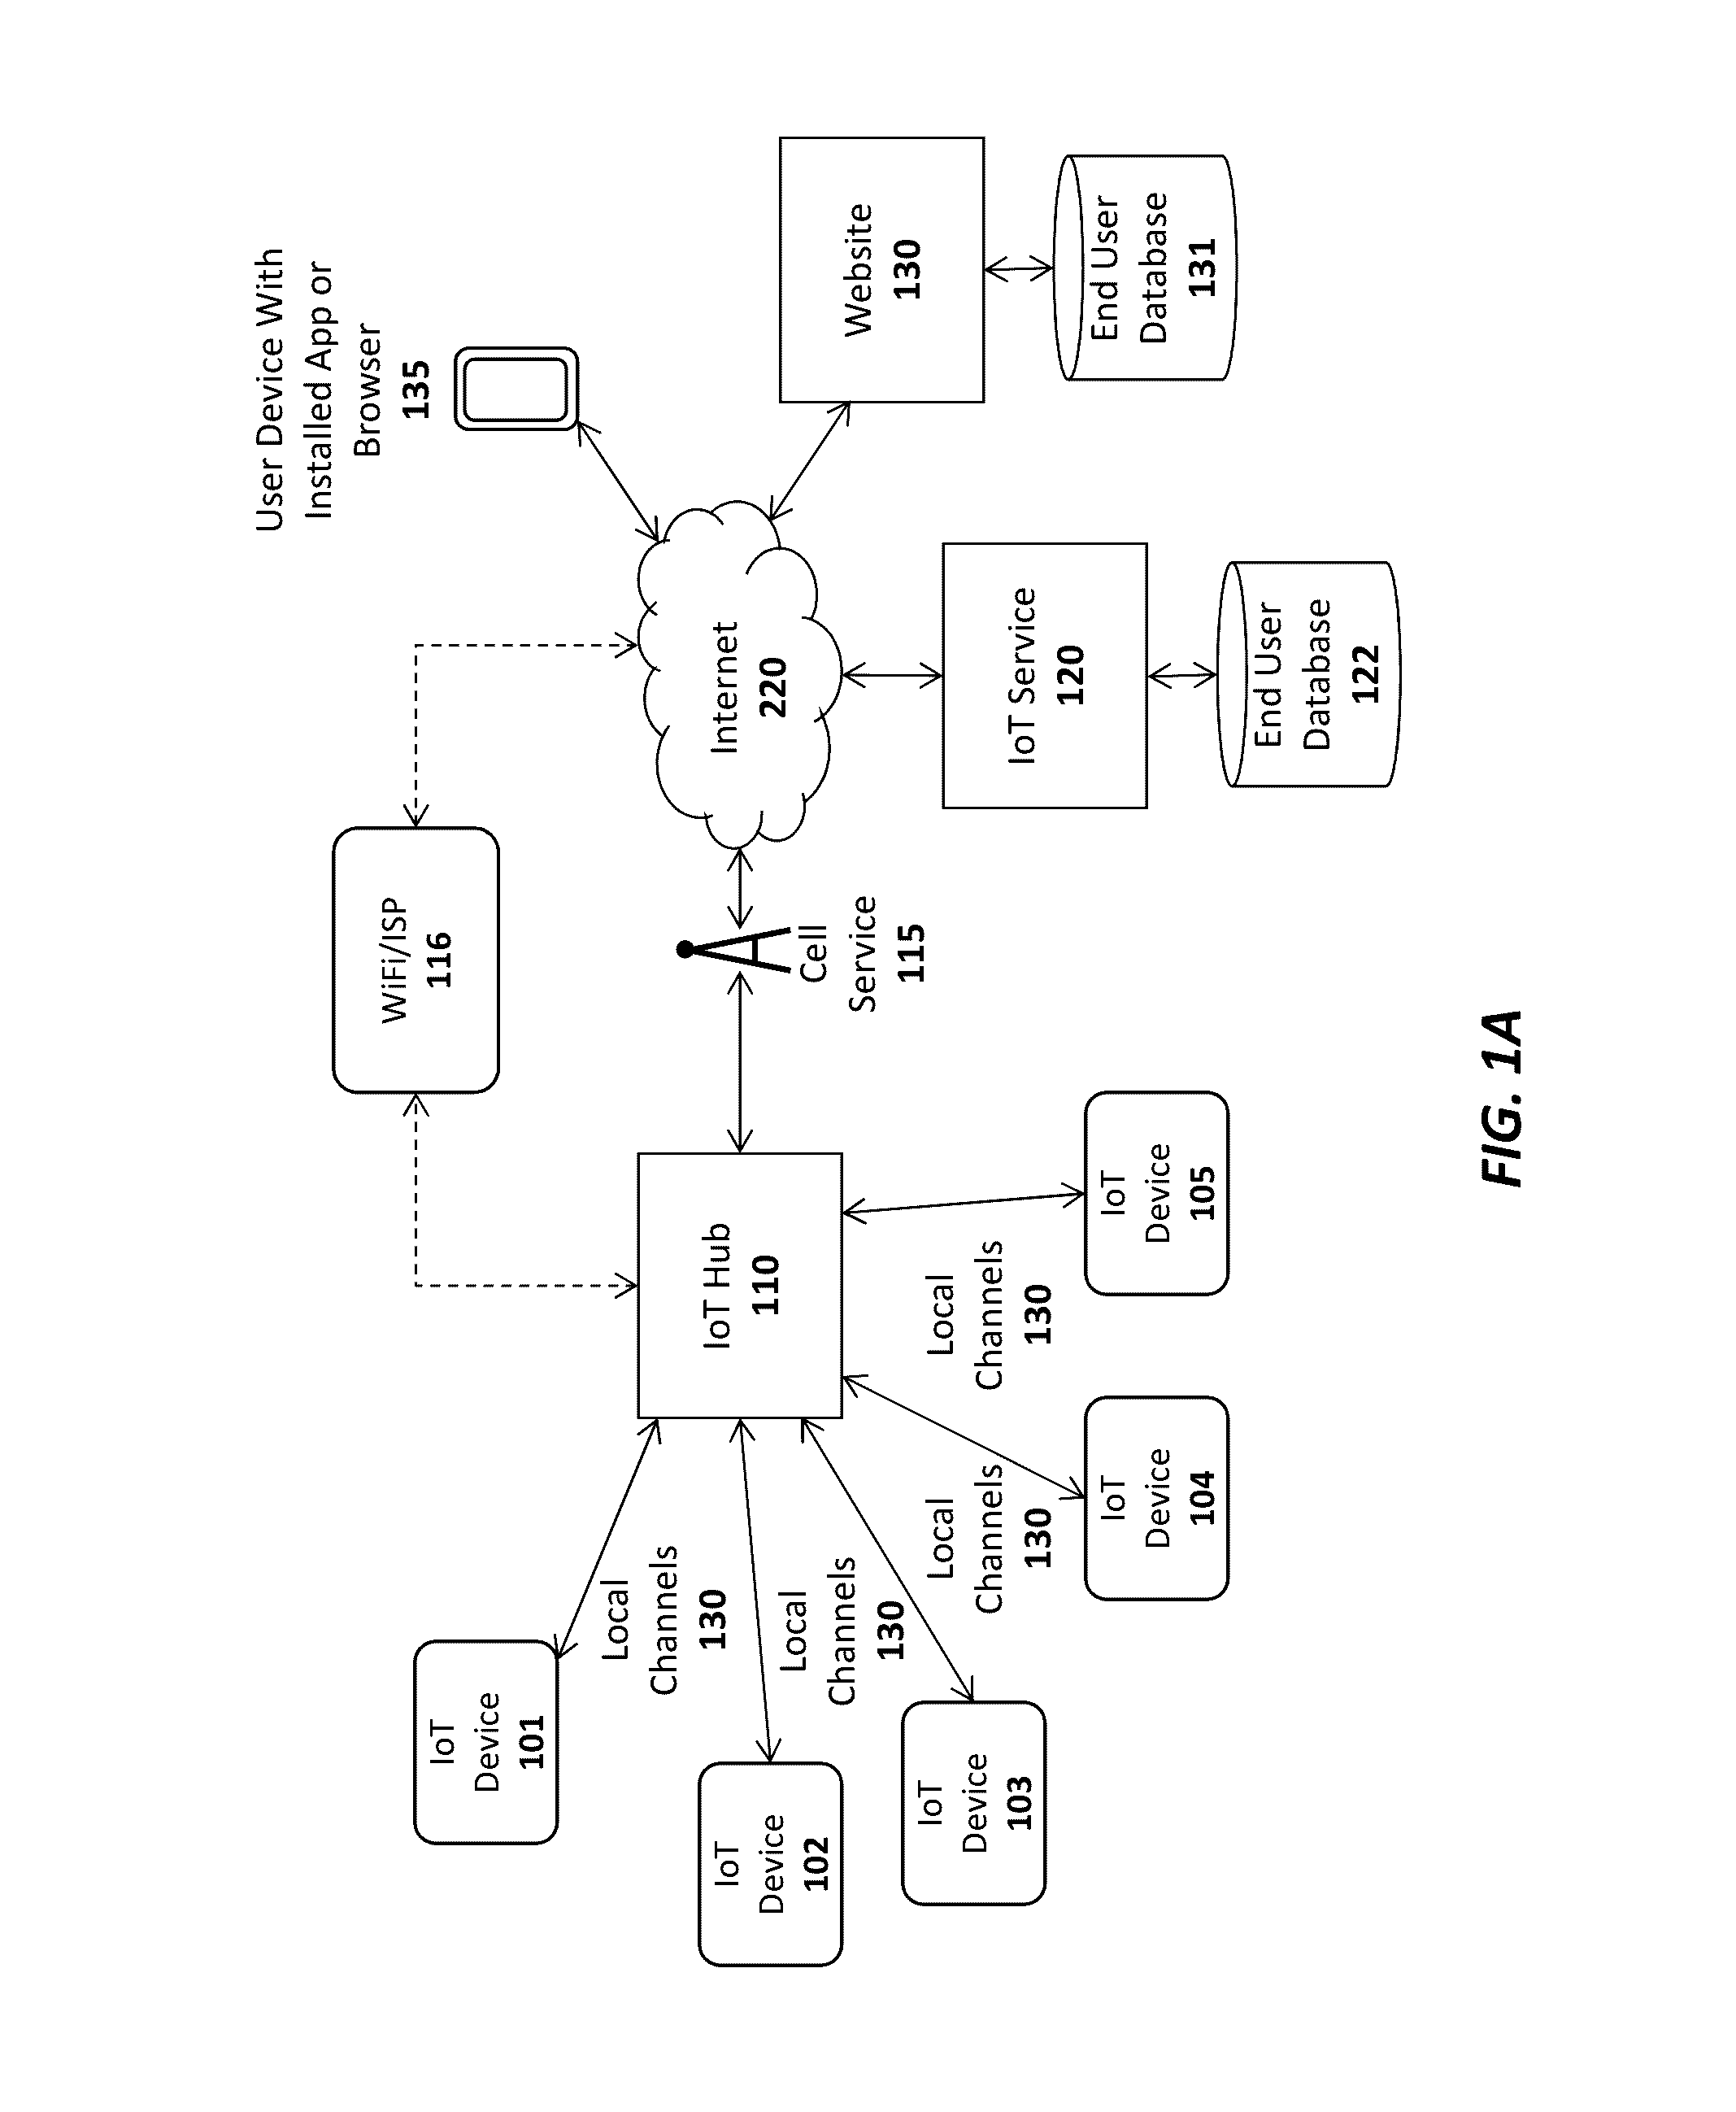 Apparatus and method for establishing secure communication channels in an internet of things (IOT) system